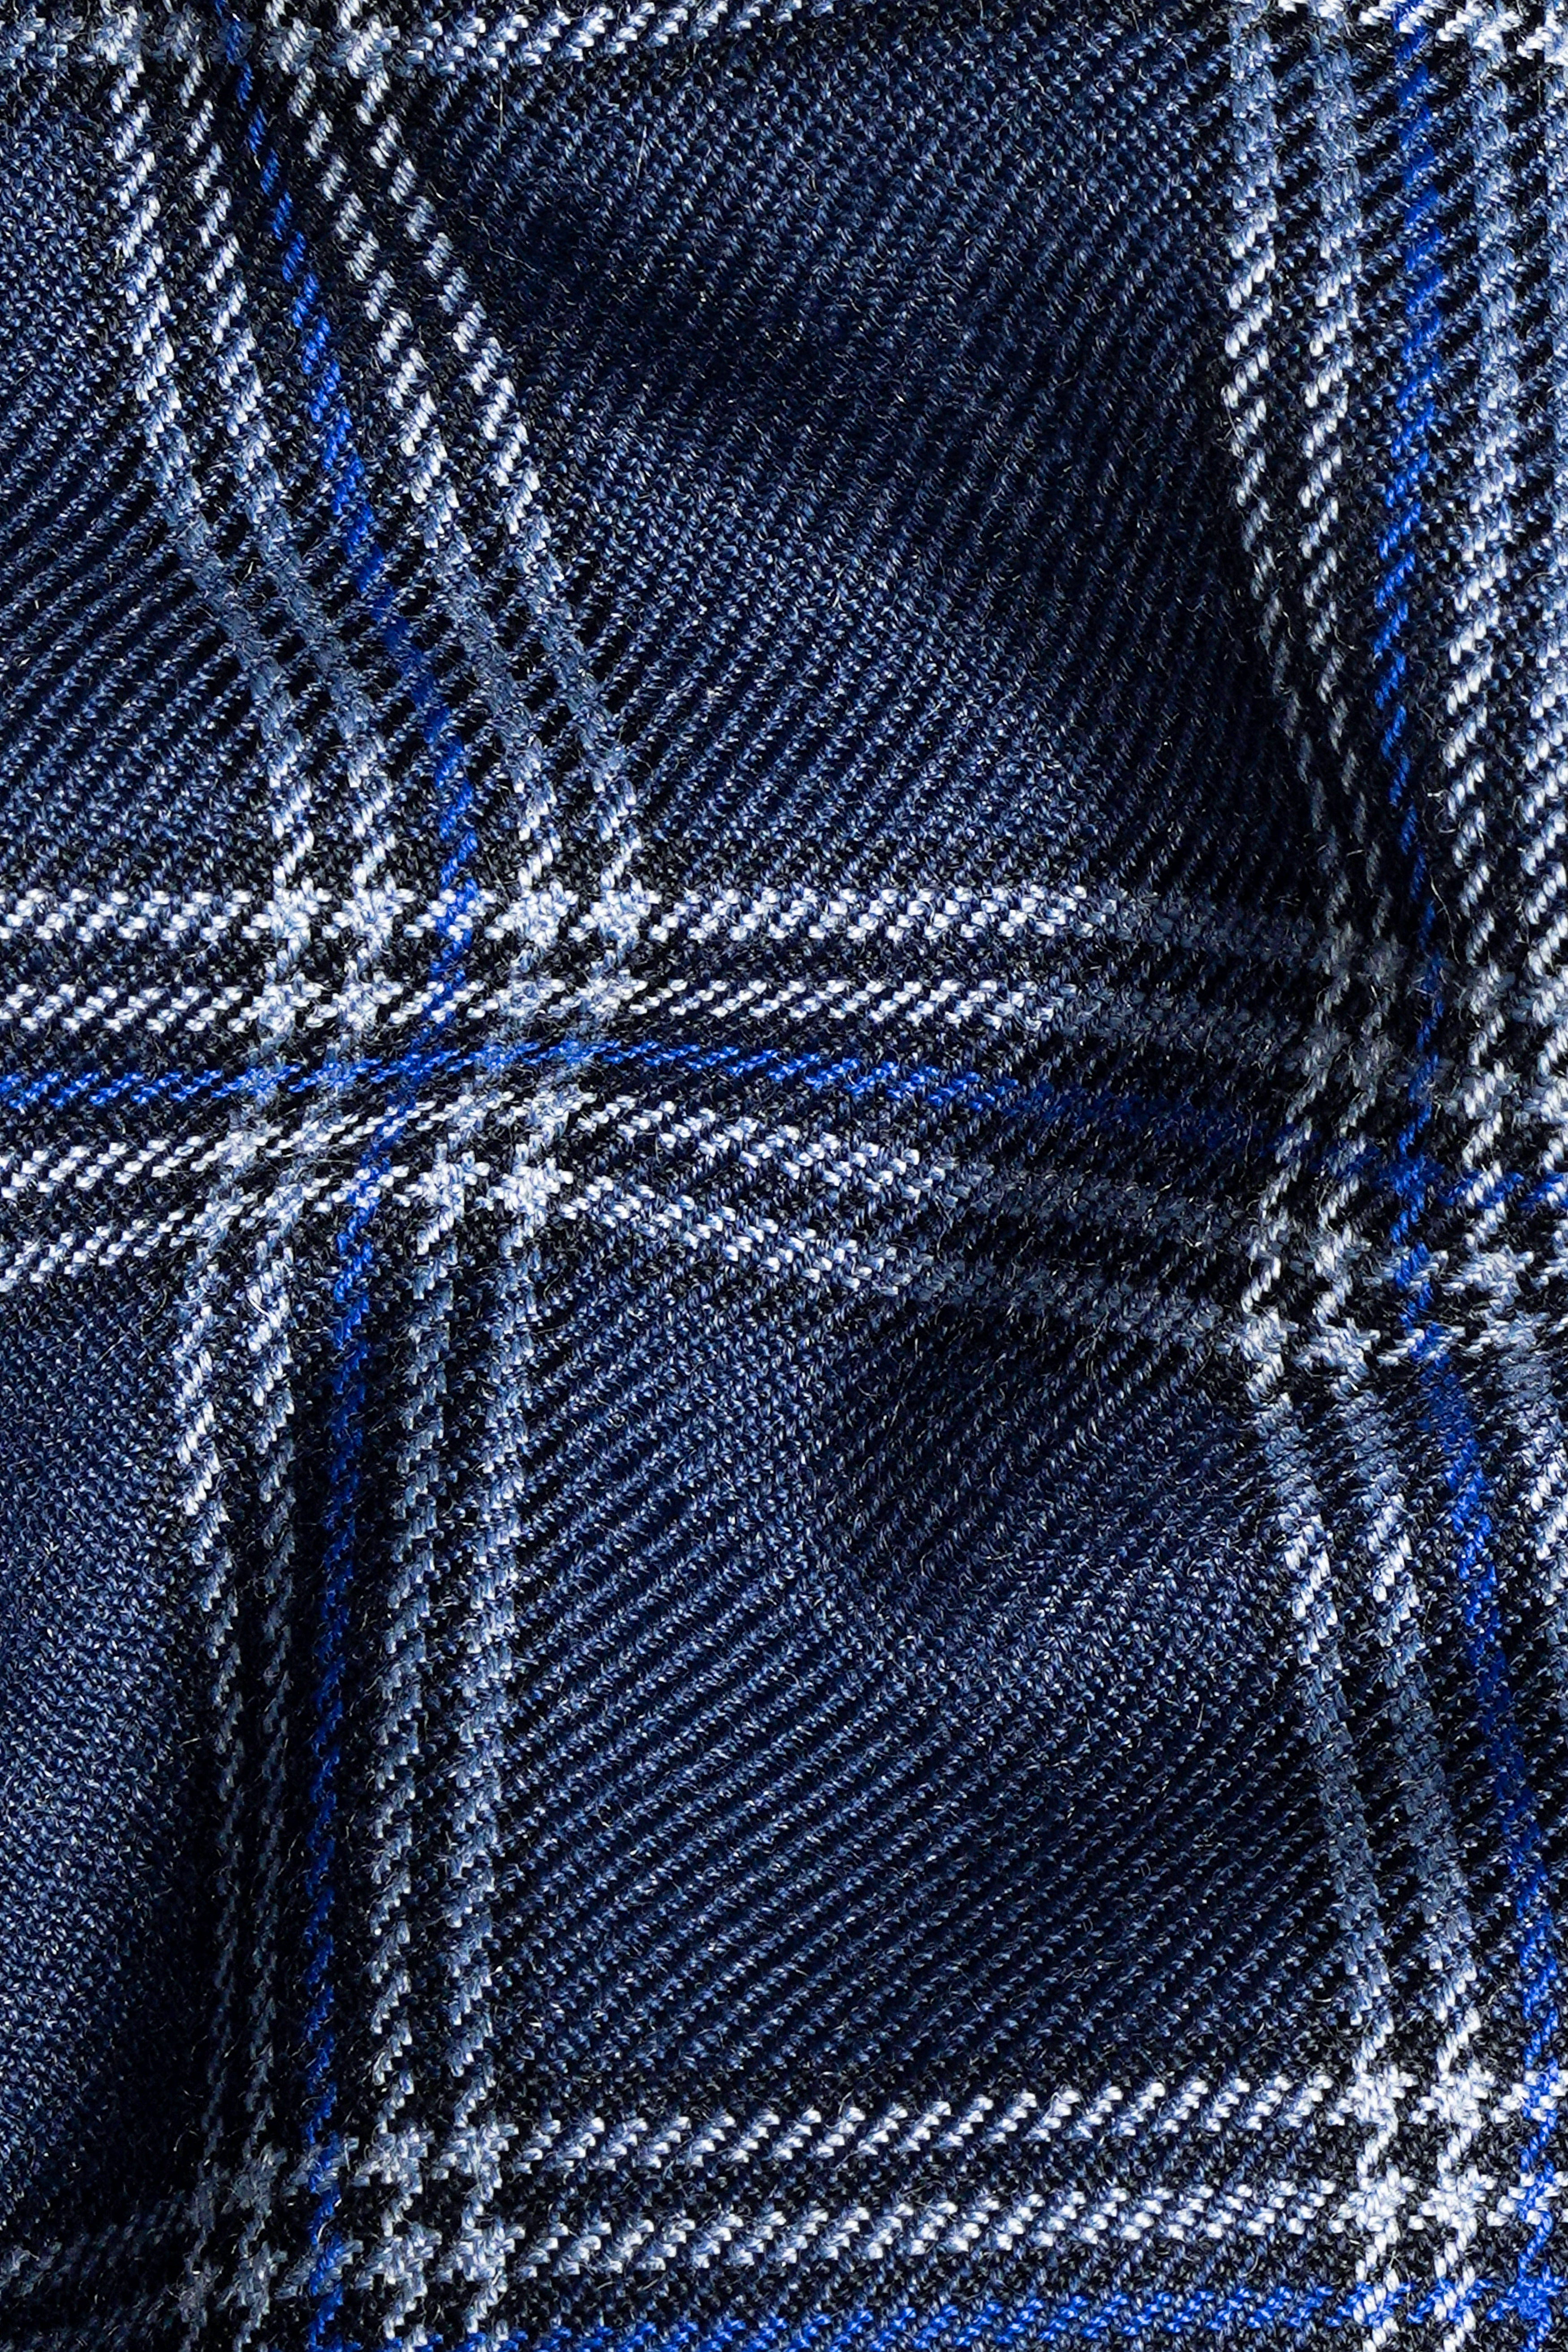 Cloud Blue and White Plaid Tweed Double Breasted Suit ST3130-DB-PP-36, ST3130-DB-PP-38, ST3130-DB-PP-40, ST3130-DB-PP-42, ST3130-DB-PP-44, ST3130-DB-PP-46, ST3130-DB-PP-48, ST3130-DB-PP-50, ST3130-DB-PP-52, ST3130-DB-PP-54, ST3130-DB-PP-56, ST3130-DB-PP-58, ST3130-DB-PP-60